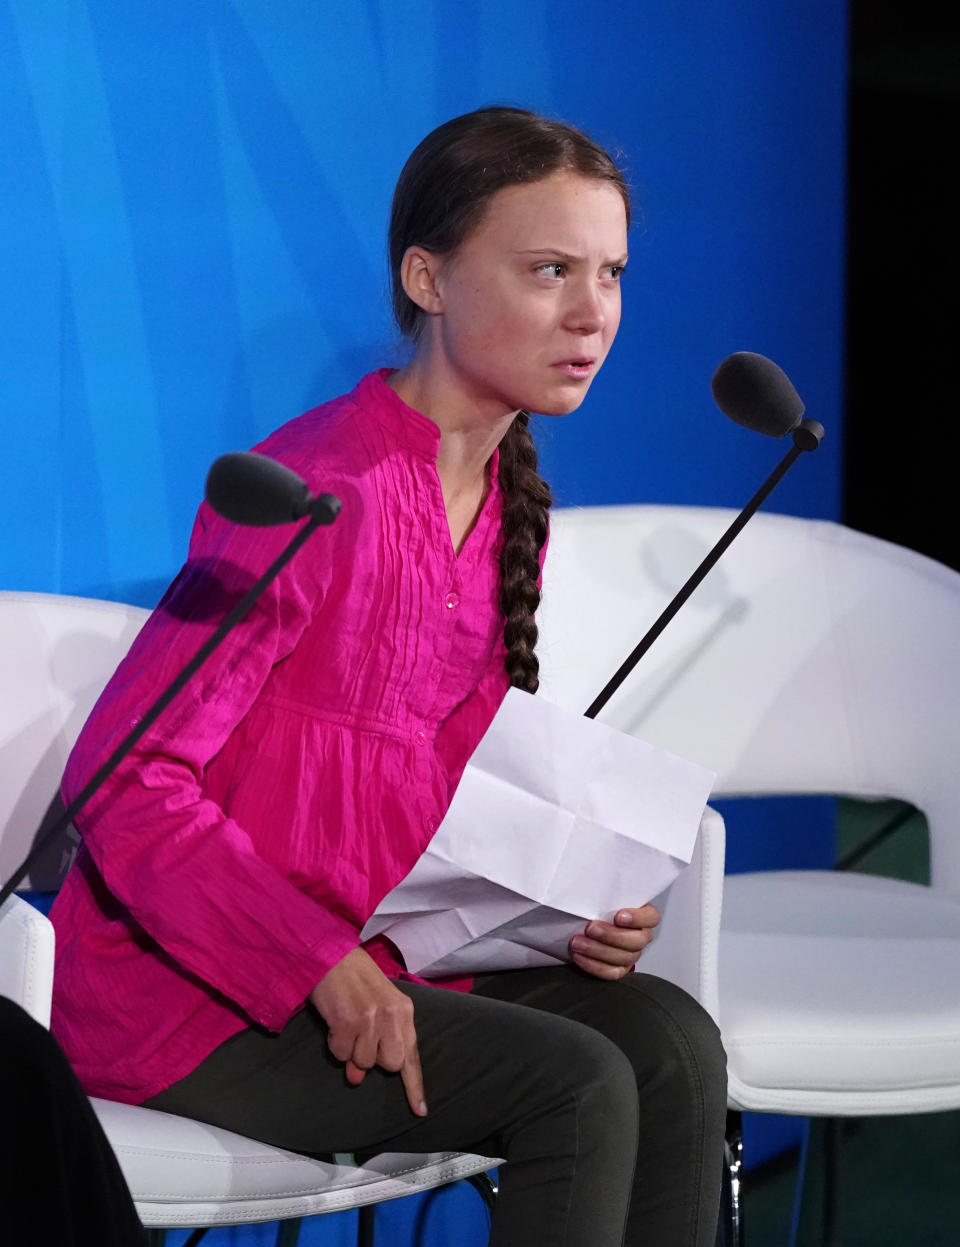 16-year-old Swedish Climate activist Greta Thunberg speaks at the 2019 United Nations Climate Action Summit at U.N. headquarters in New York City, New York, U.S., September 23, 2019.